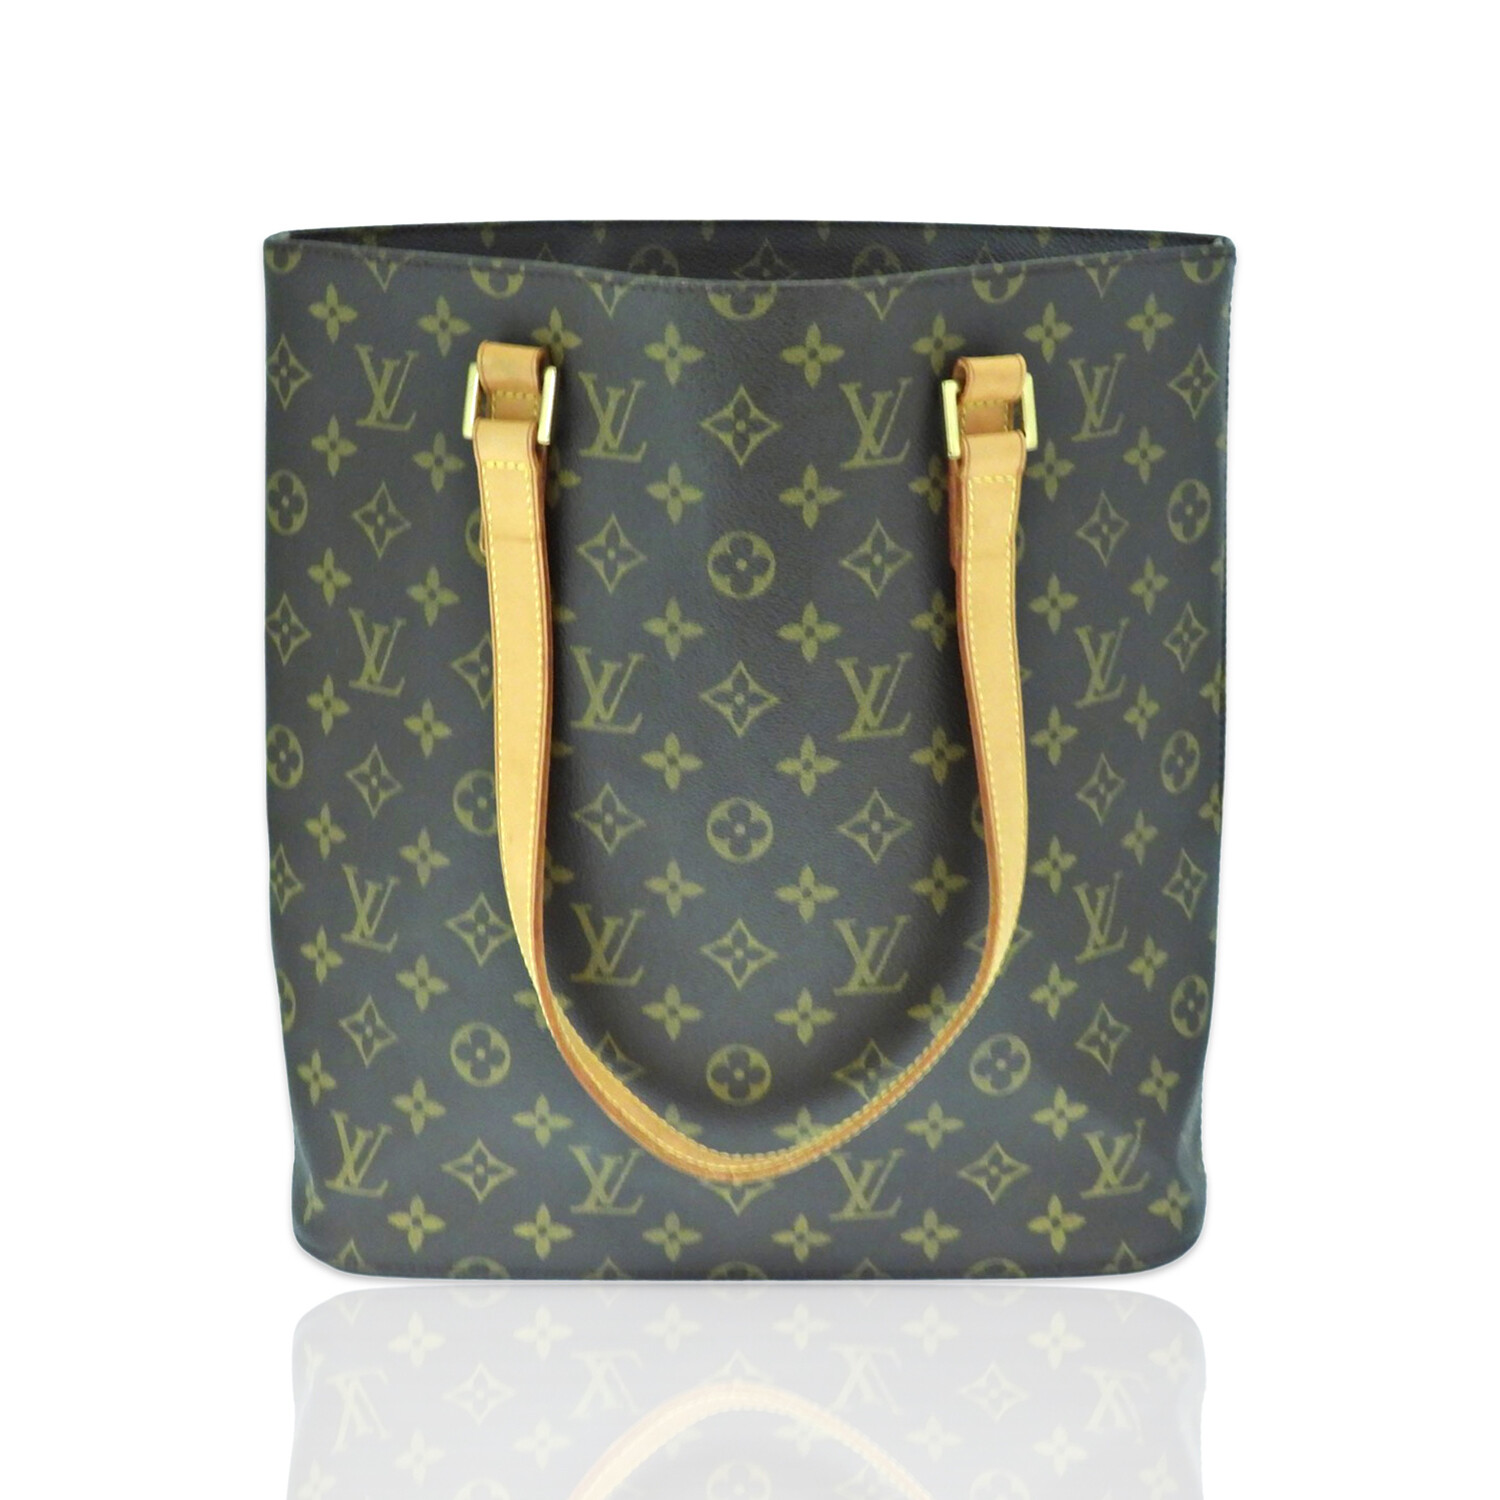 Louis Vuitton Louis Vuitton LV Cup Gray Waterproof Small Tote Bag